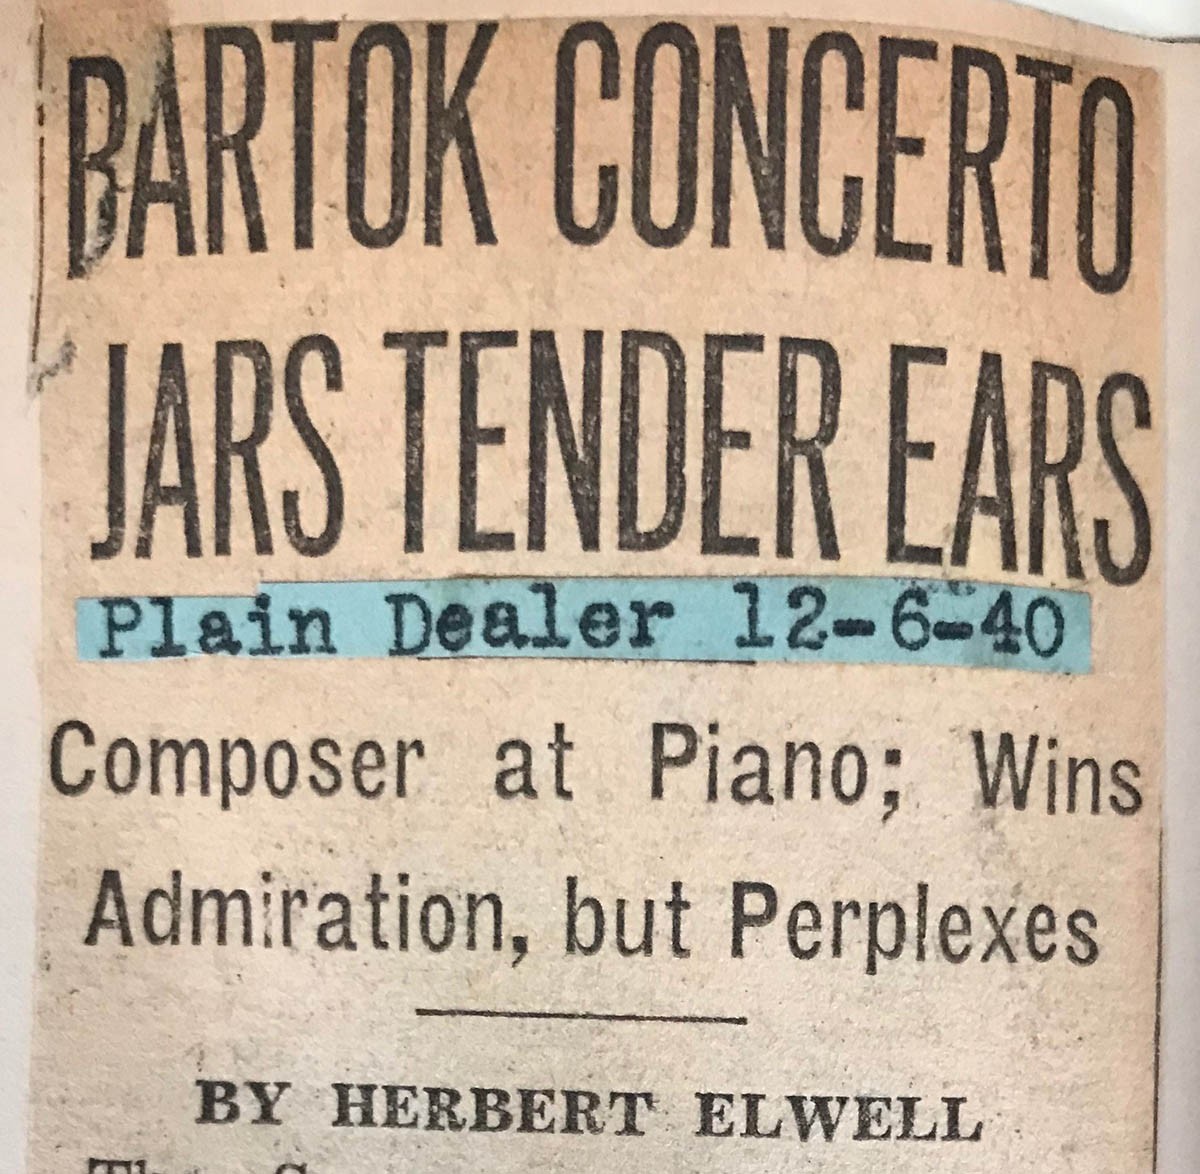 Headline to article that reads “Bartók Concerto Jars Tender Ears: Composer at Piano”